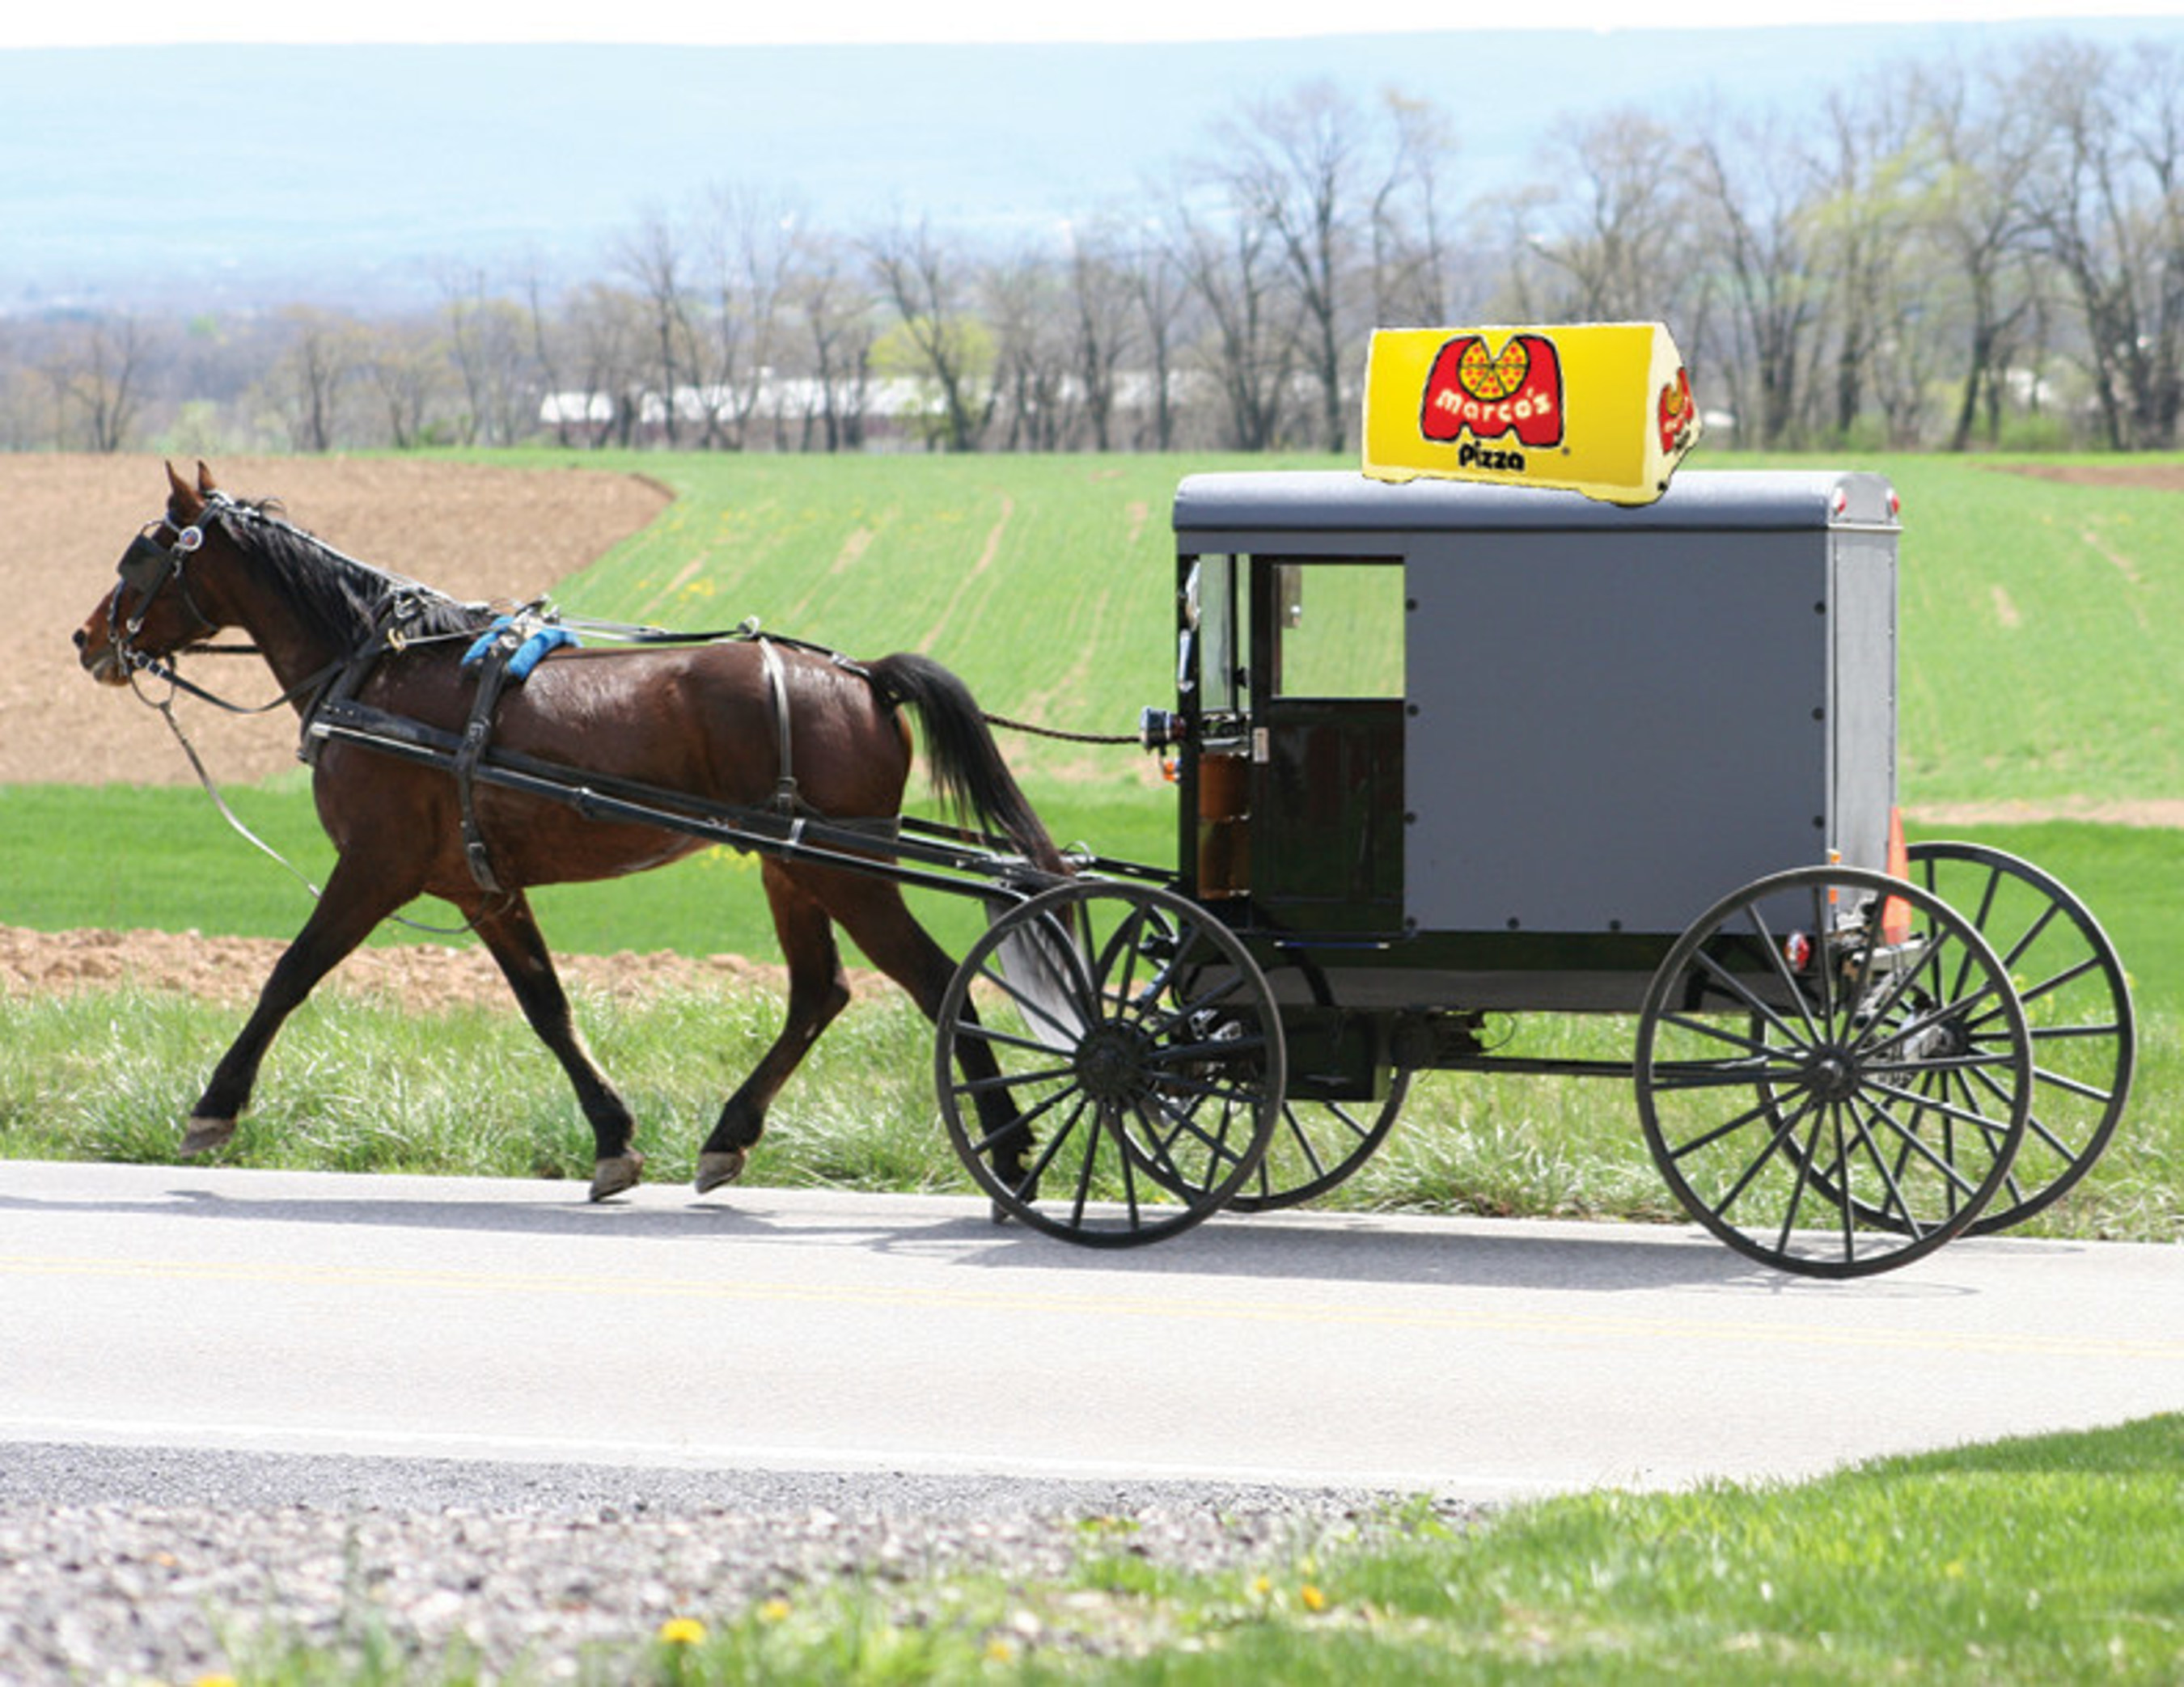 Marco's Pizza experiments with alternative delivery methods, like horse & buggy.  It's all part of its Fact or Fool social media promotion.  Go to Marco's Facebook page to cast your vote.